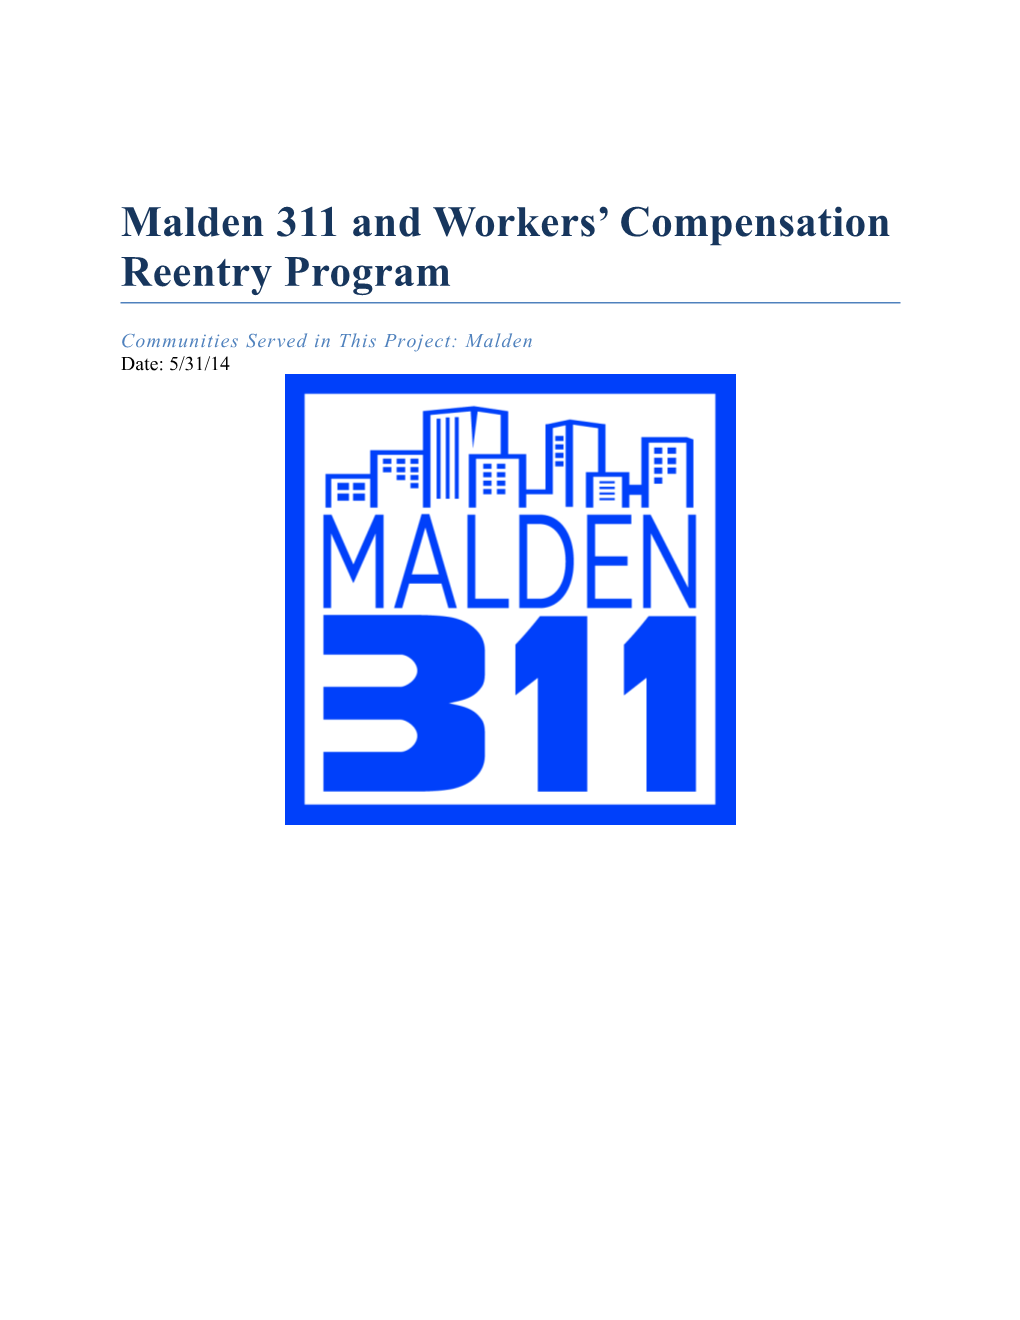 Malden 311 and Workers Compensation Reentry Program